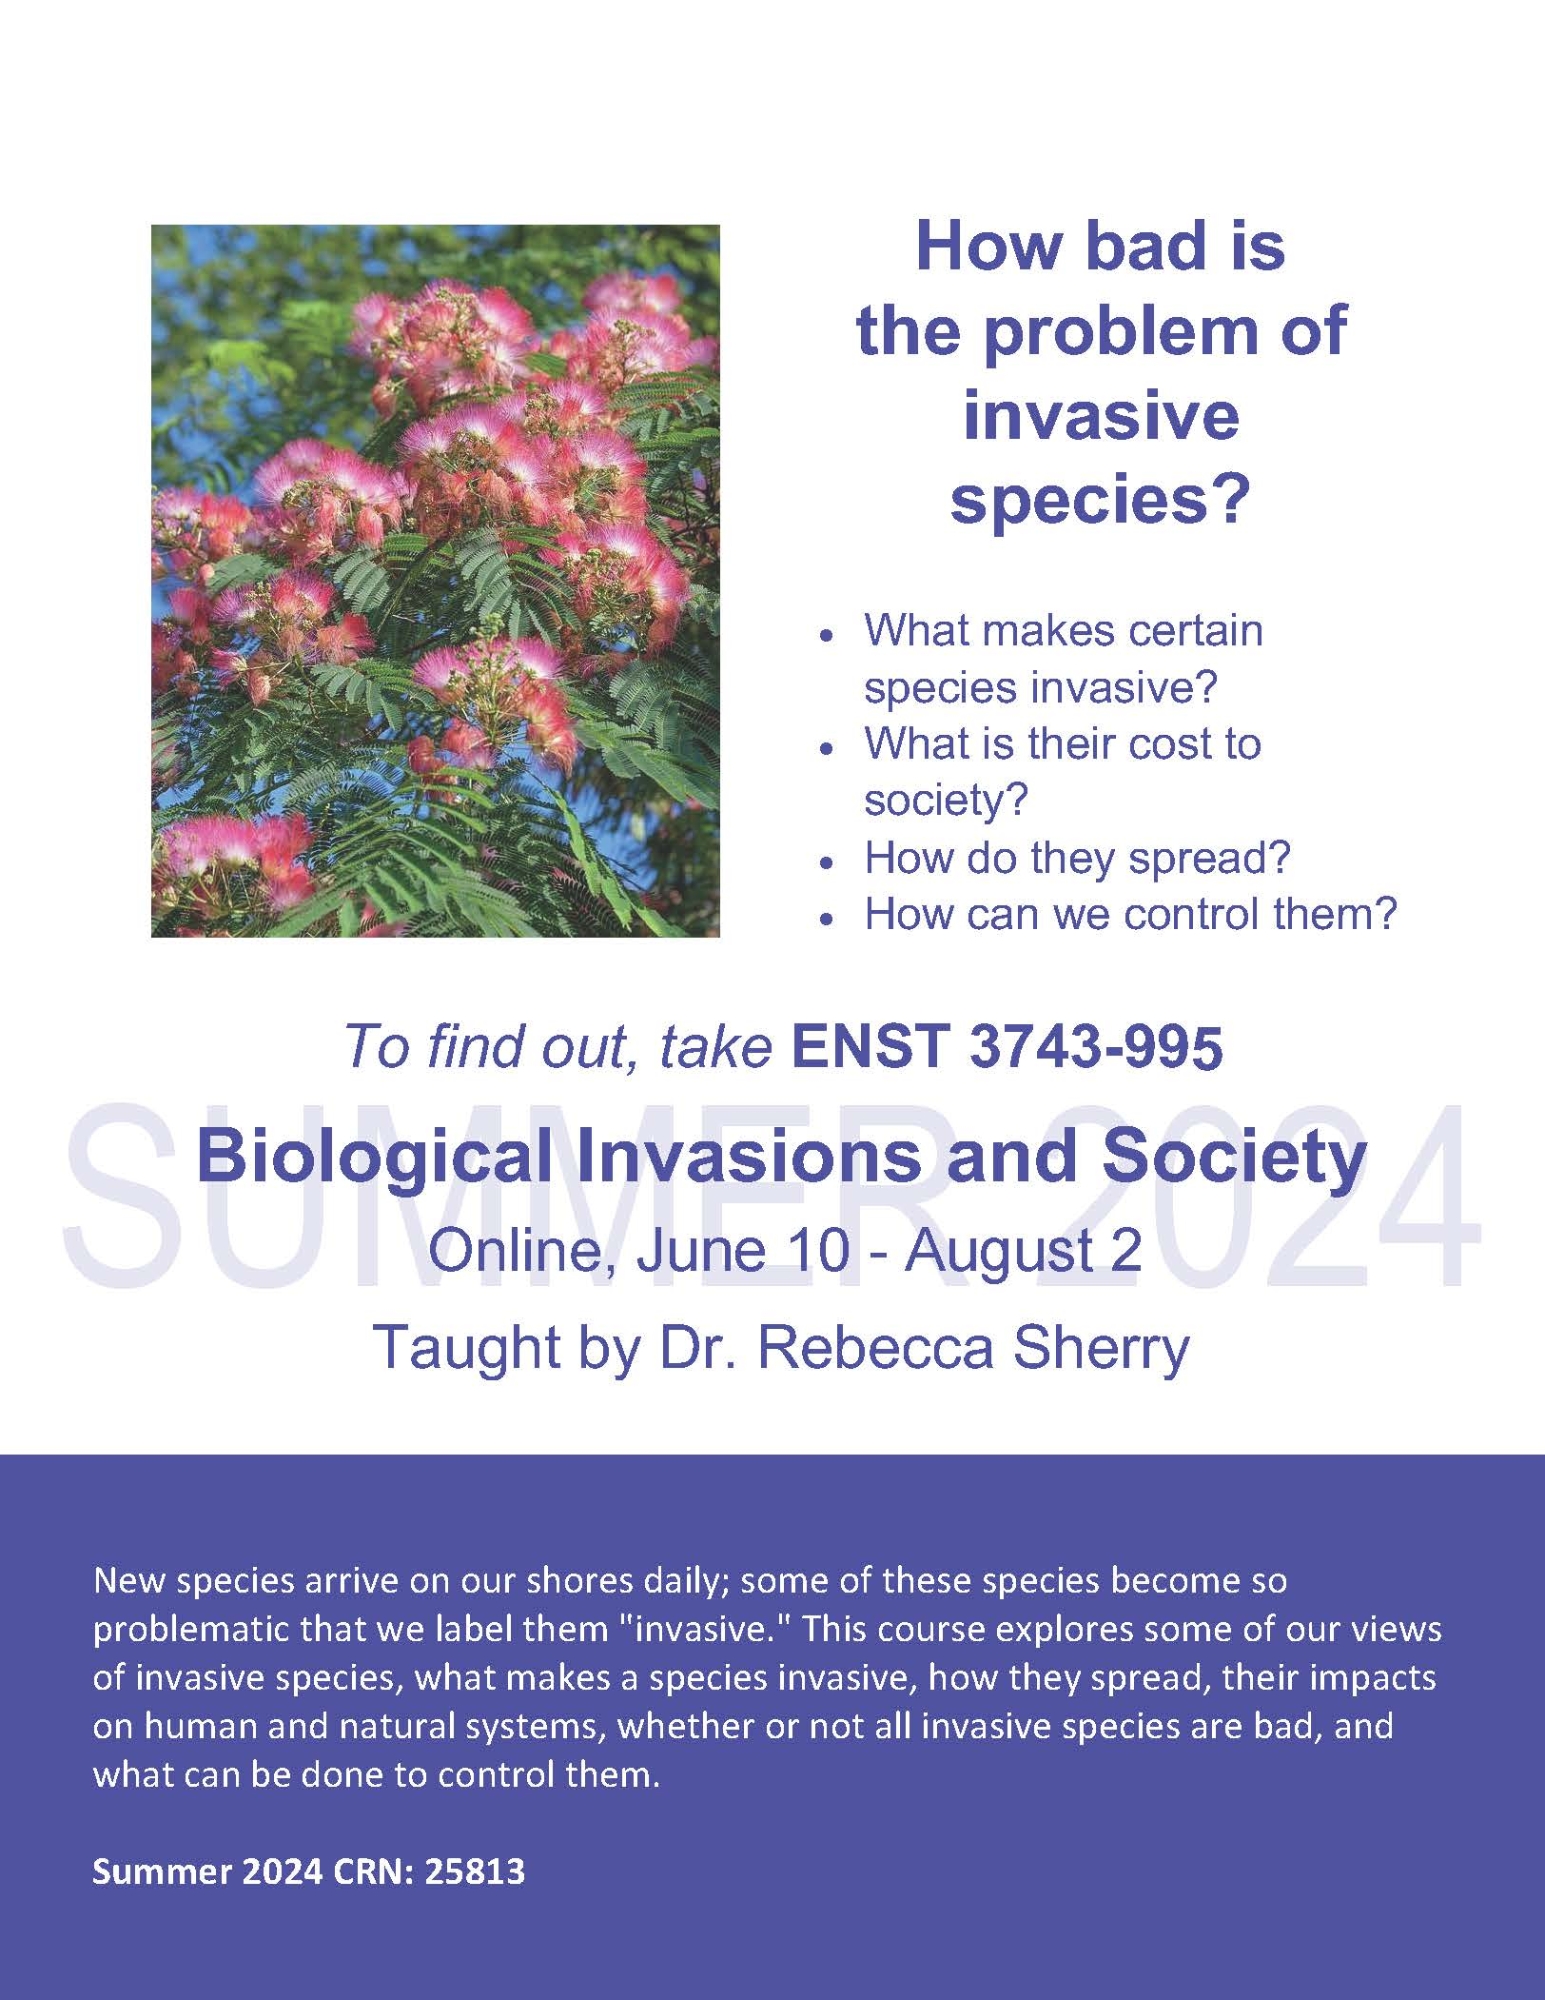 How bad is the problem of invasive species? • What makes certain species invasive? • What is their cost to society? • How do they spread? • How can we control them? To find out, take ENST 3743-995 Biological Invasions and Society Online, June 10 - August 2 Taught by Dr. Rebecca Sherry New species arrive on our shores daily; some of these species become so problematic that we label them "invasive." This course explores some of our views of invasive species, what makes a species invasive, how they spread, their impacts on human and natural systems, whether or not all invasive species are bad, and what can be done to control them. Summer 2024 CRN: 25813